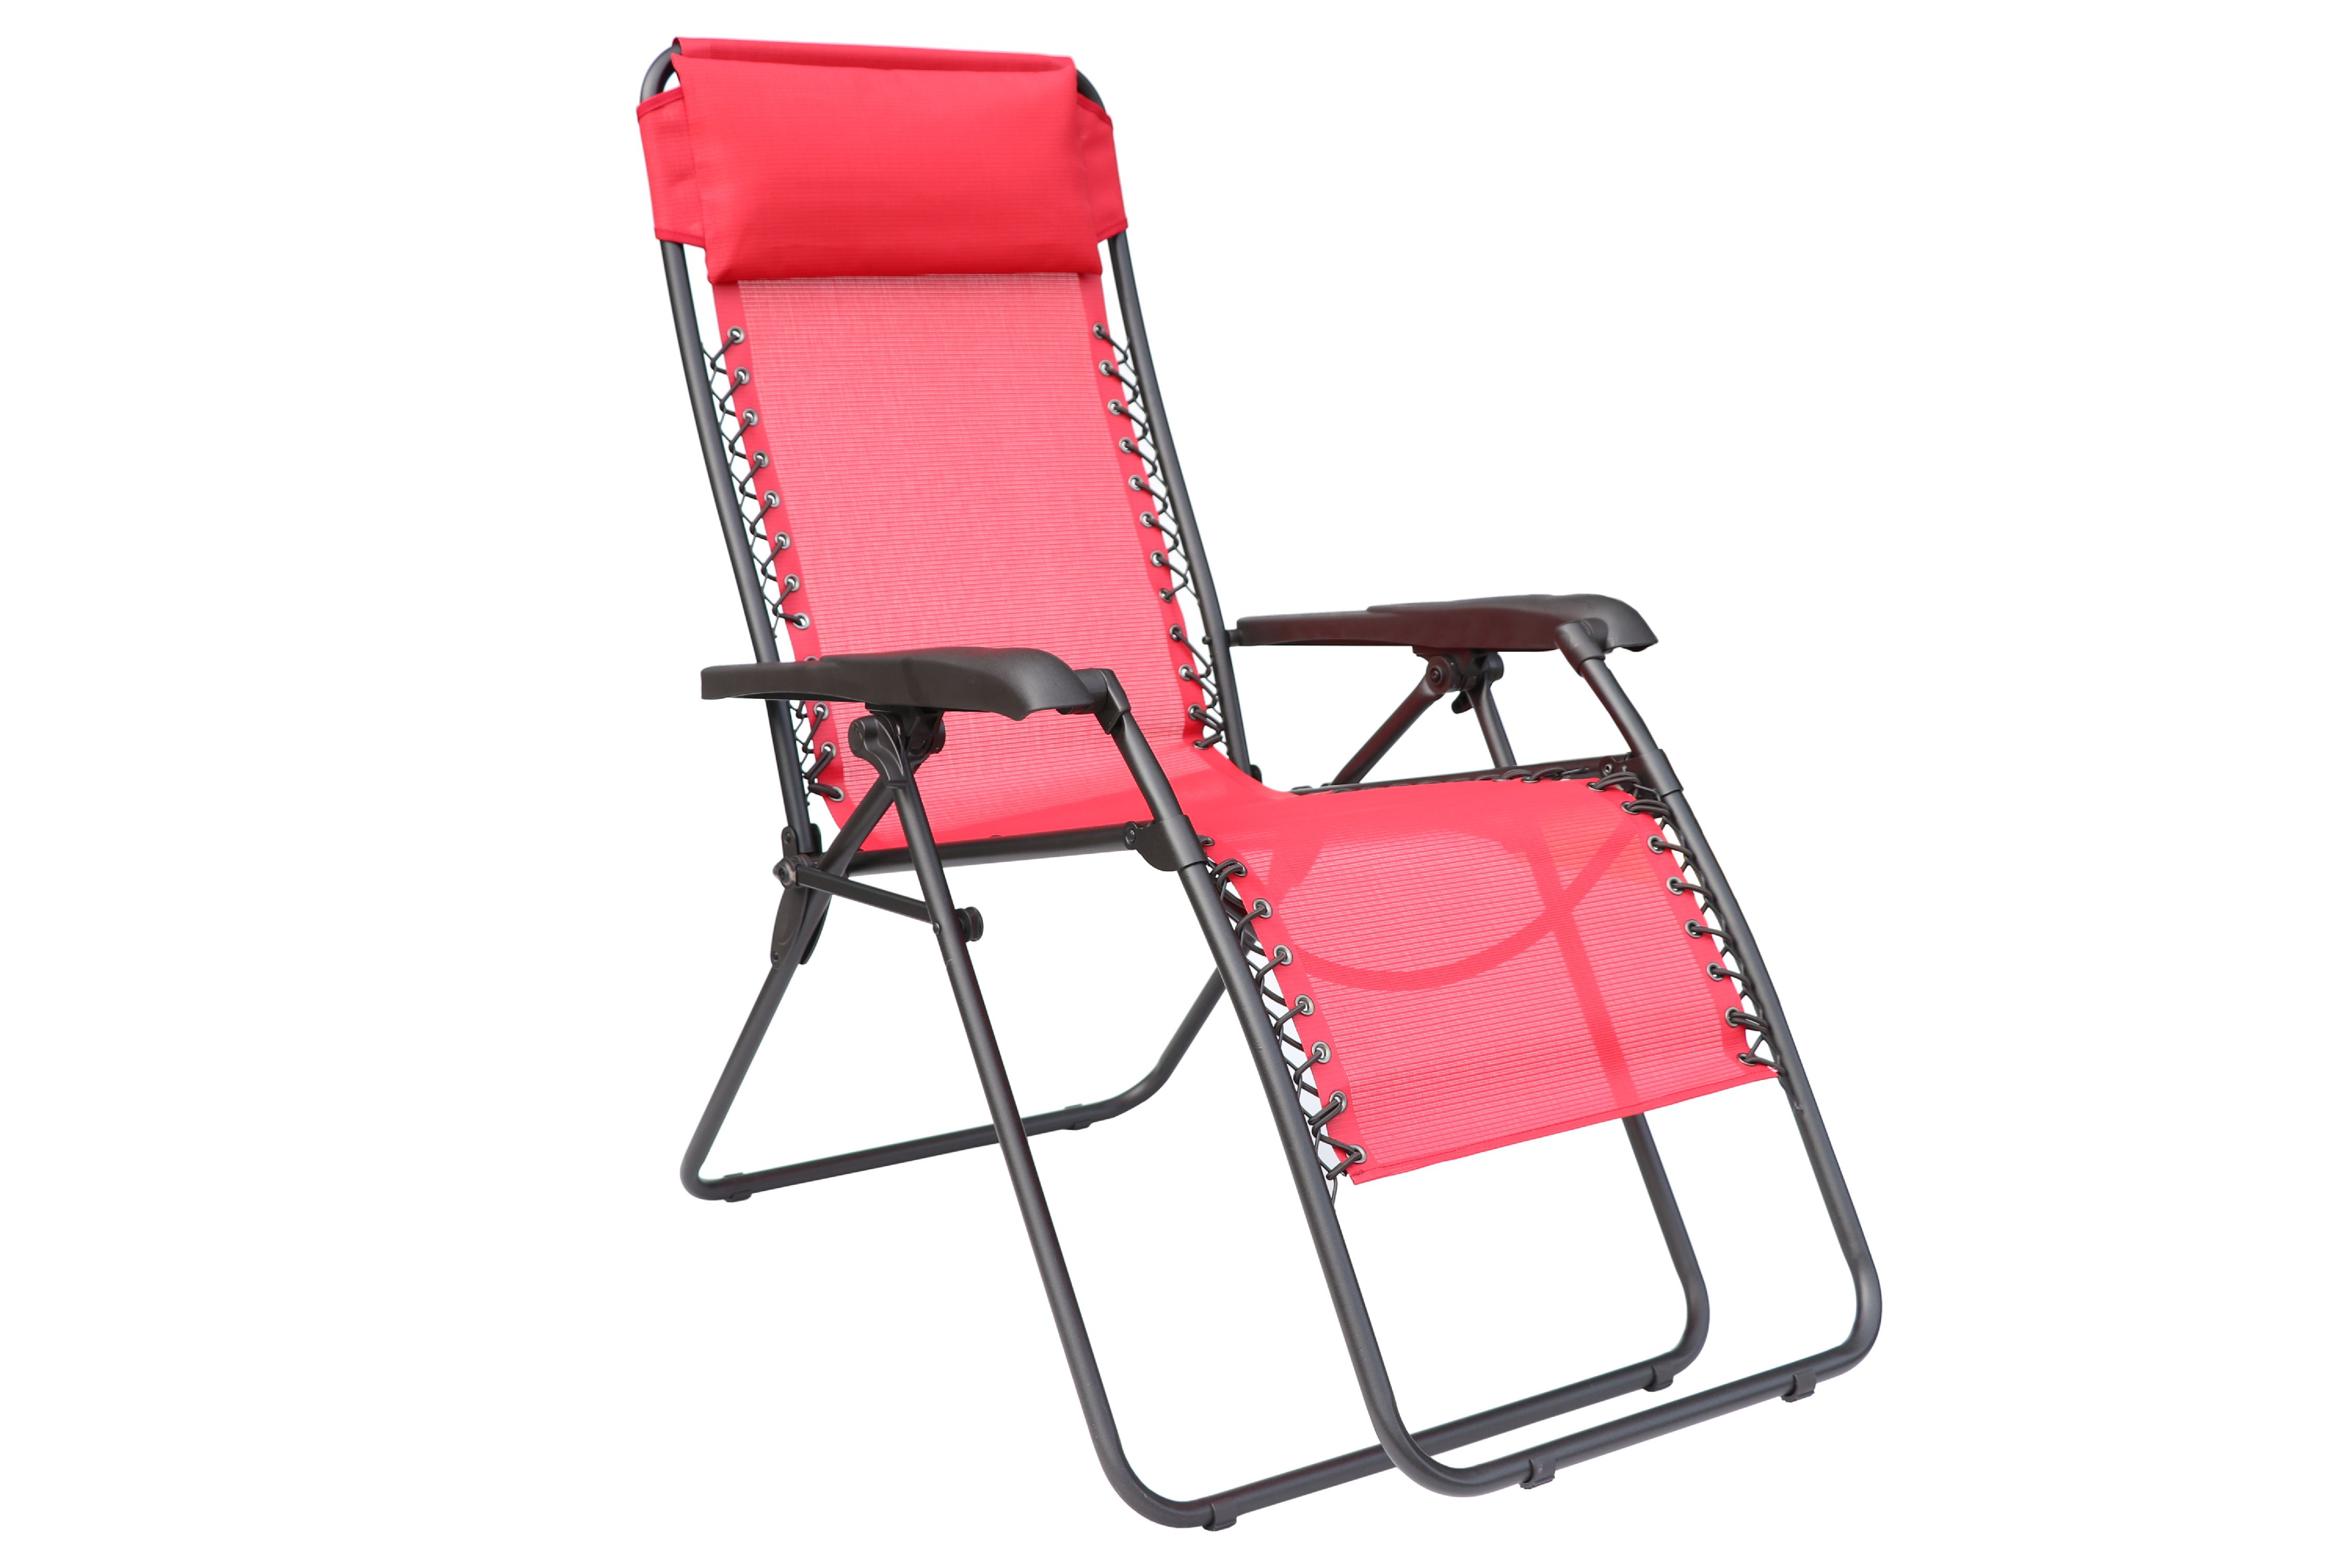 Mainstays Zero Gravity Bungee Lounge Chair - Red - image 1 of 8